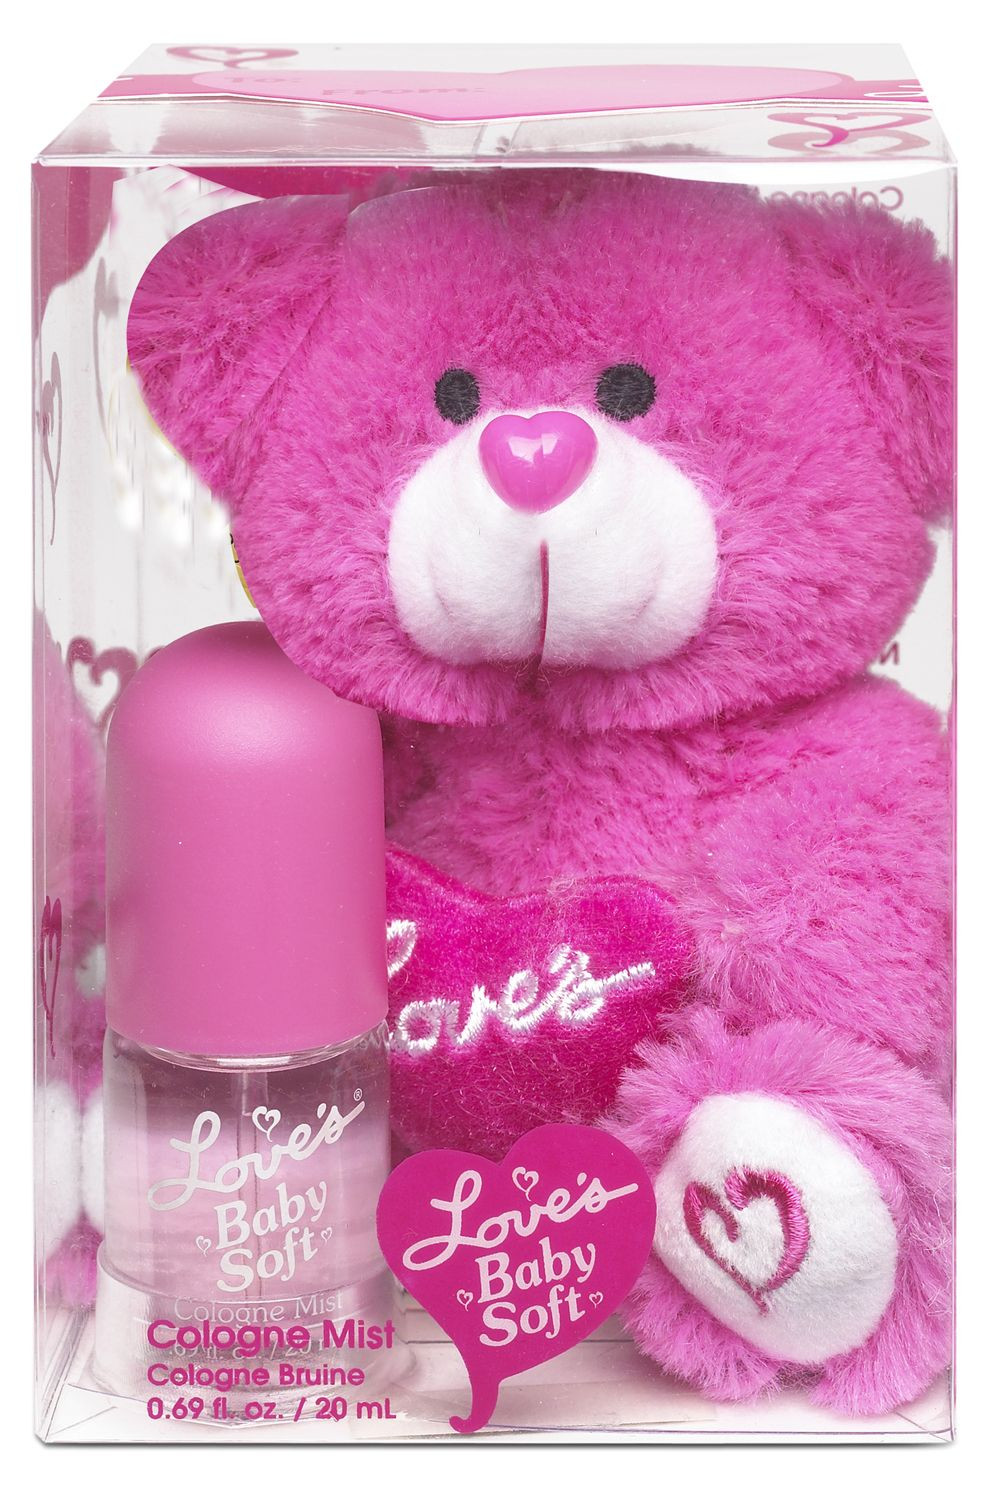 Loves Baby Soft Perfume Gift Set
 Love s Baby Soft Fragrance Gift Set with Bear